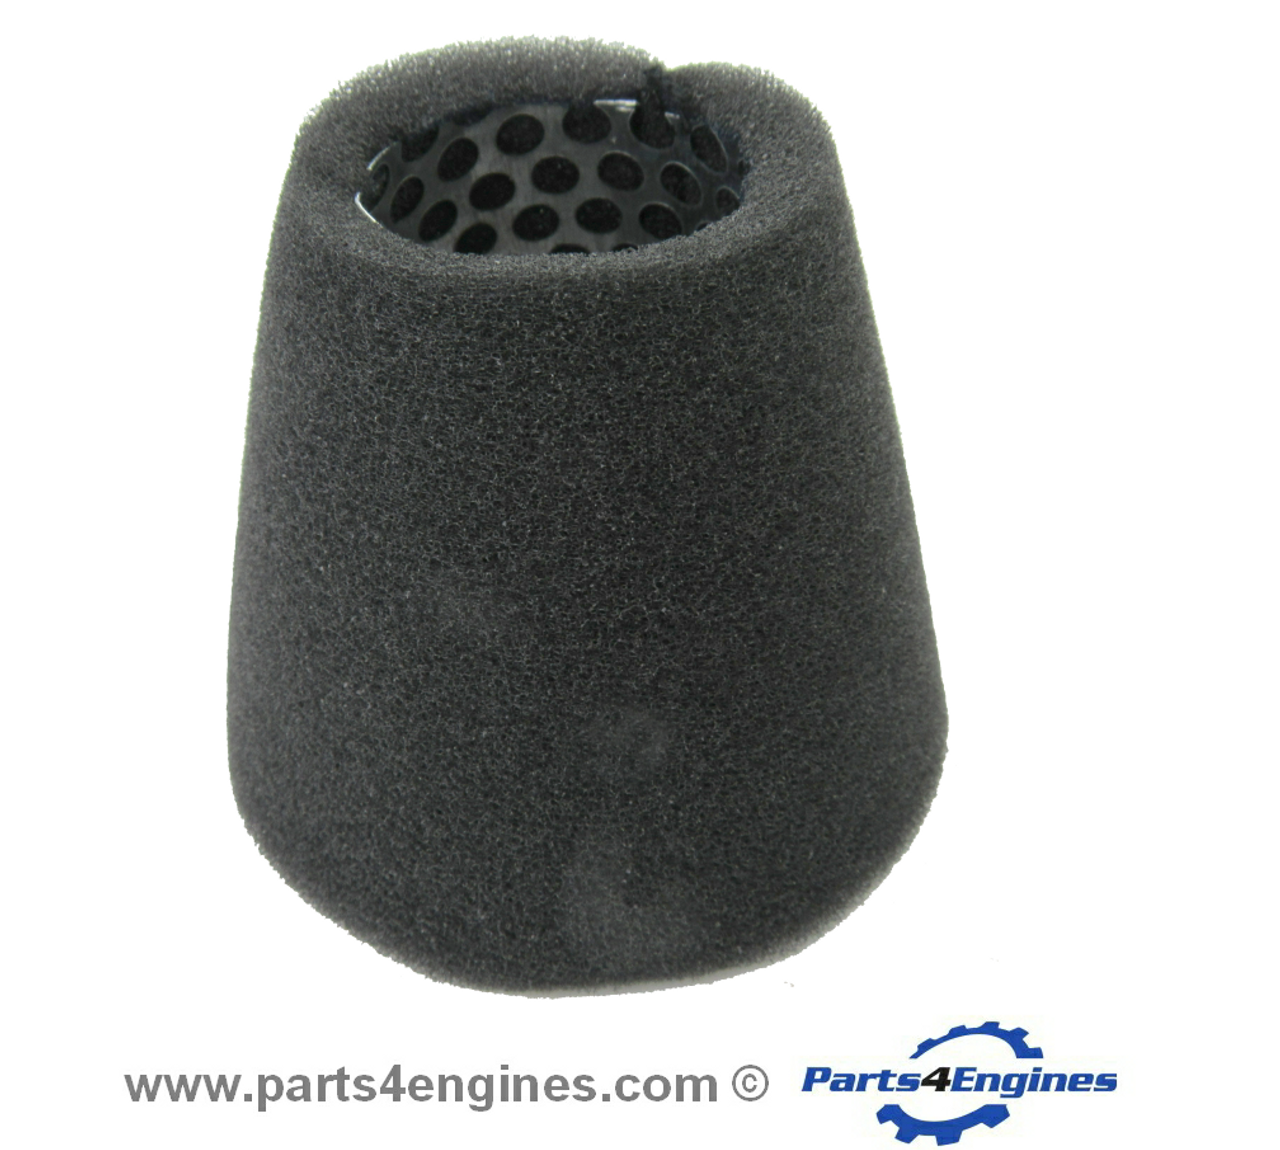 Yanmar 1GM Air Filter, from parts4engines.com 